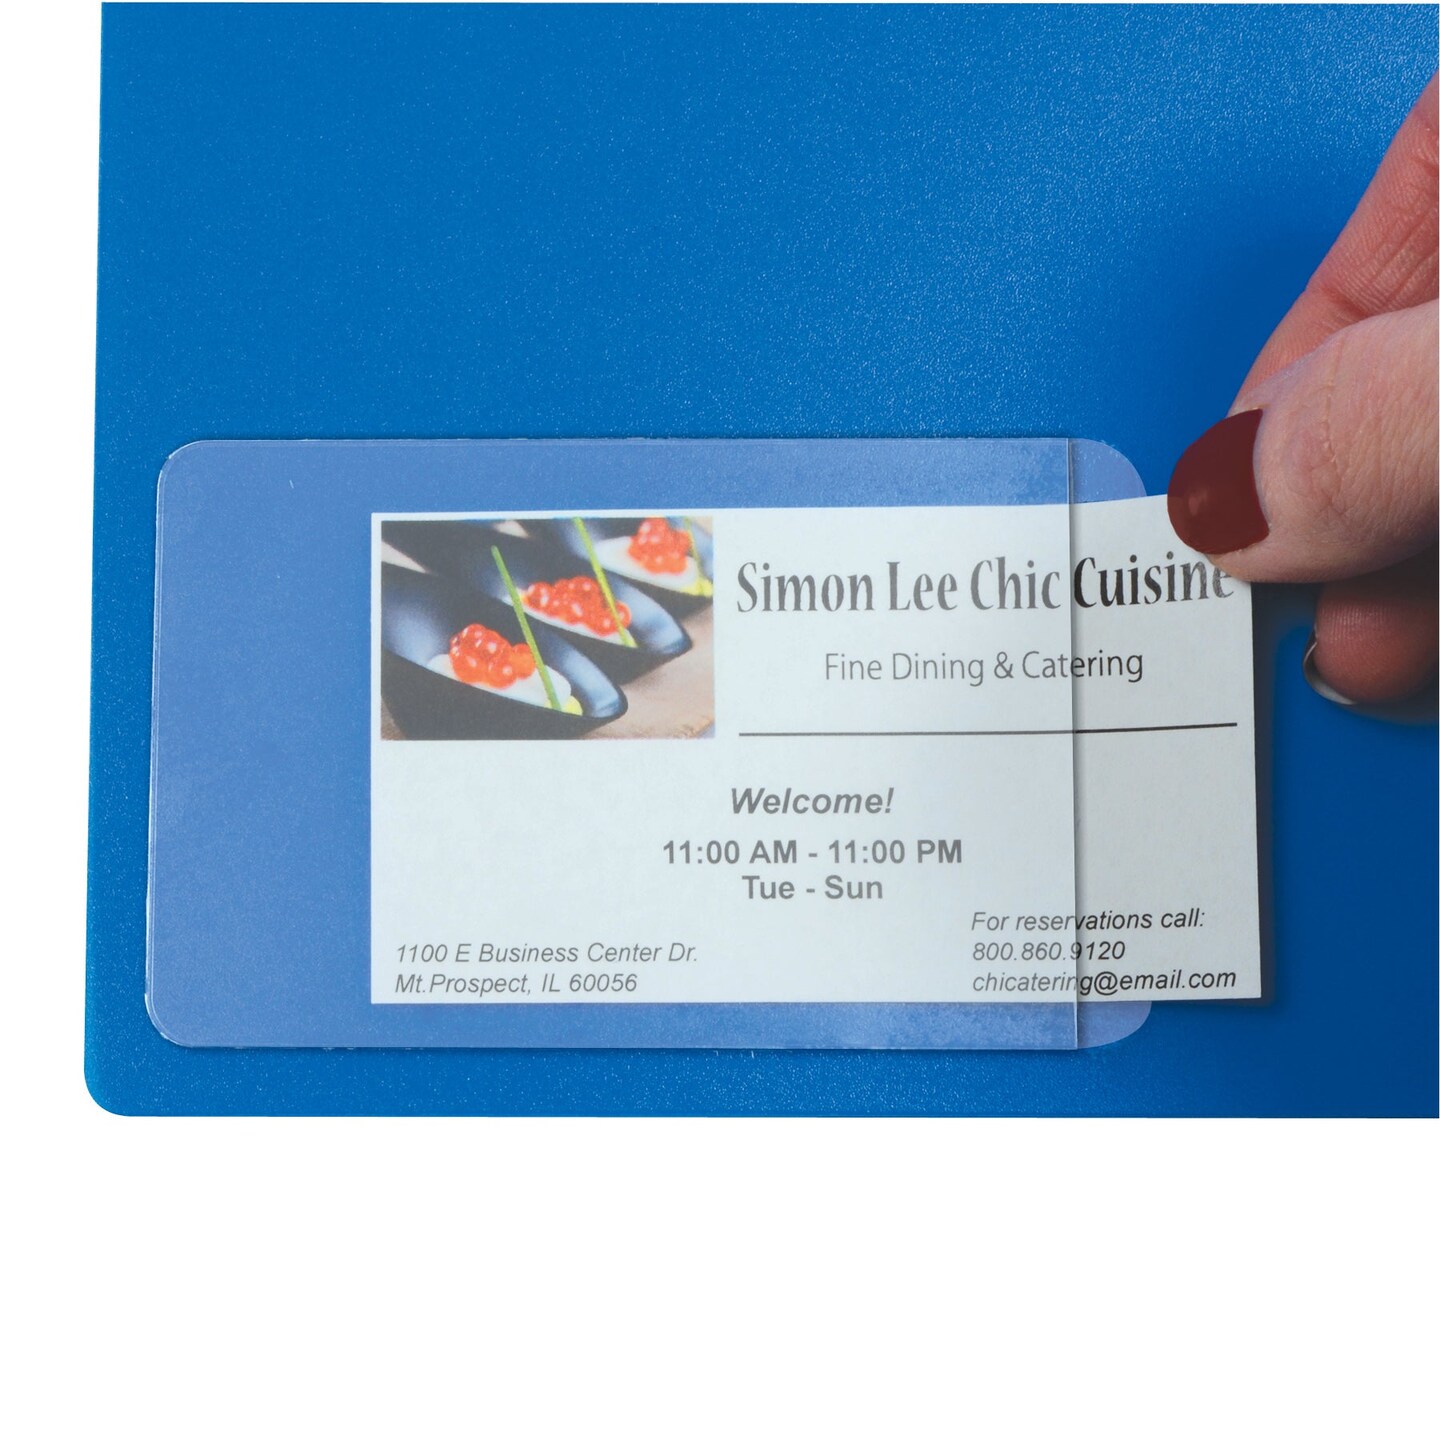 Self-Adhesive Business Card Holder, Side Load, 2&#x22; x 3-1/2&#x22;, 10 Per Pack, 5 Packs